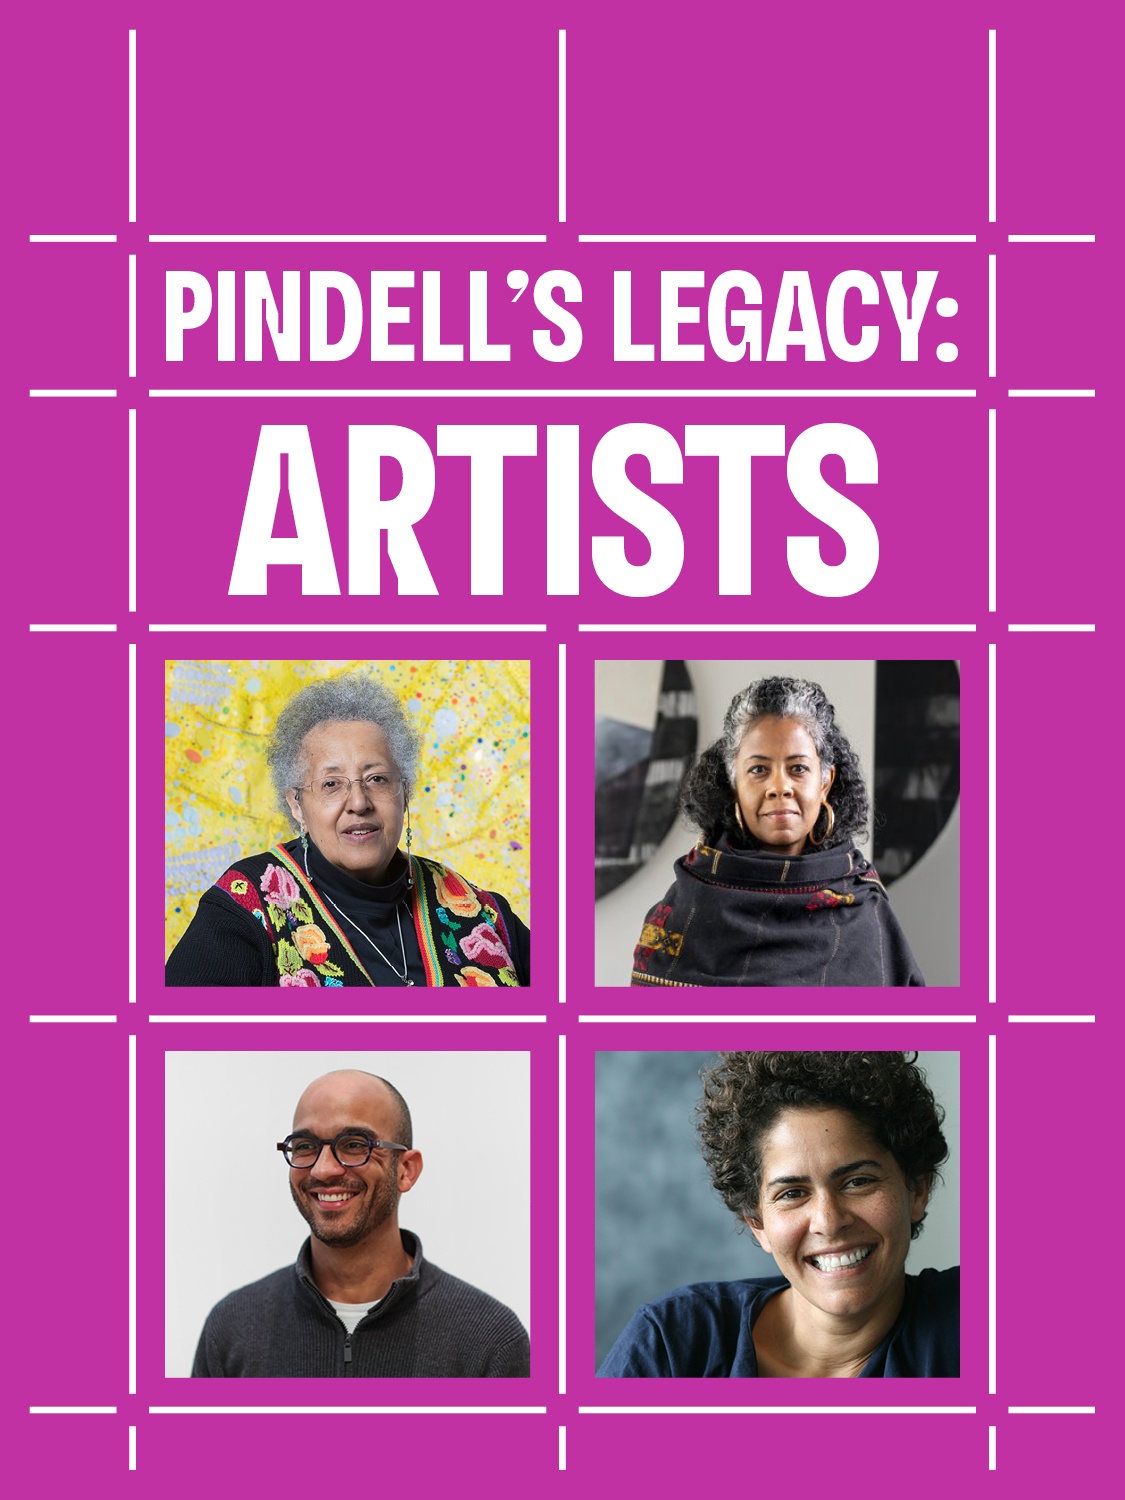 Photos (clockwise from top left) of artists Howardena Pindell, Torkwase Dyson, Julie Mehretu, and Samuel Levi Jones set in a grid pattern with the words Pindell's Legacy: Artists above the images